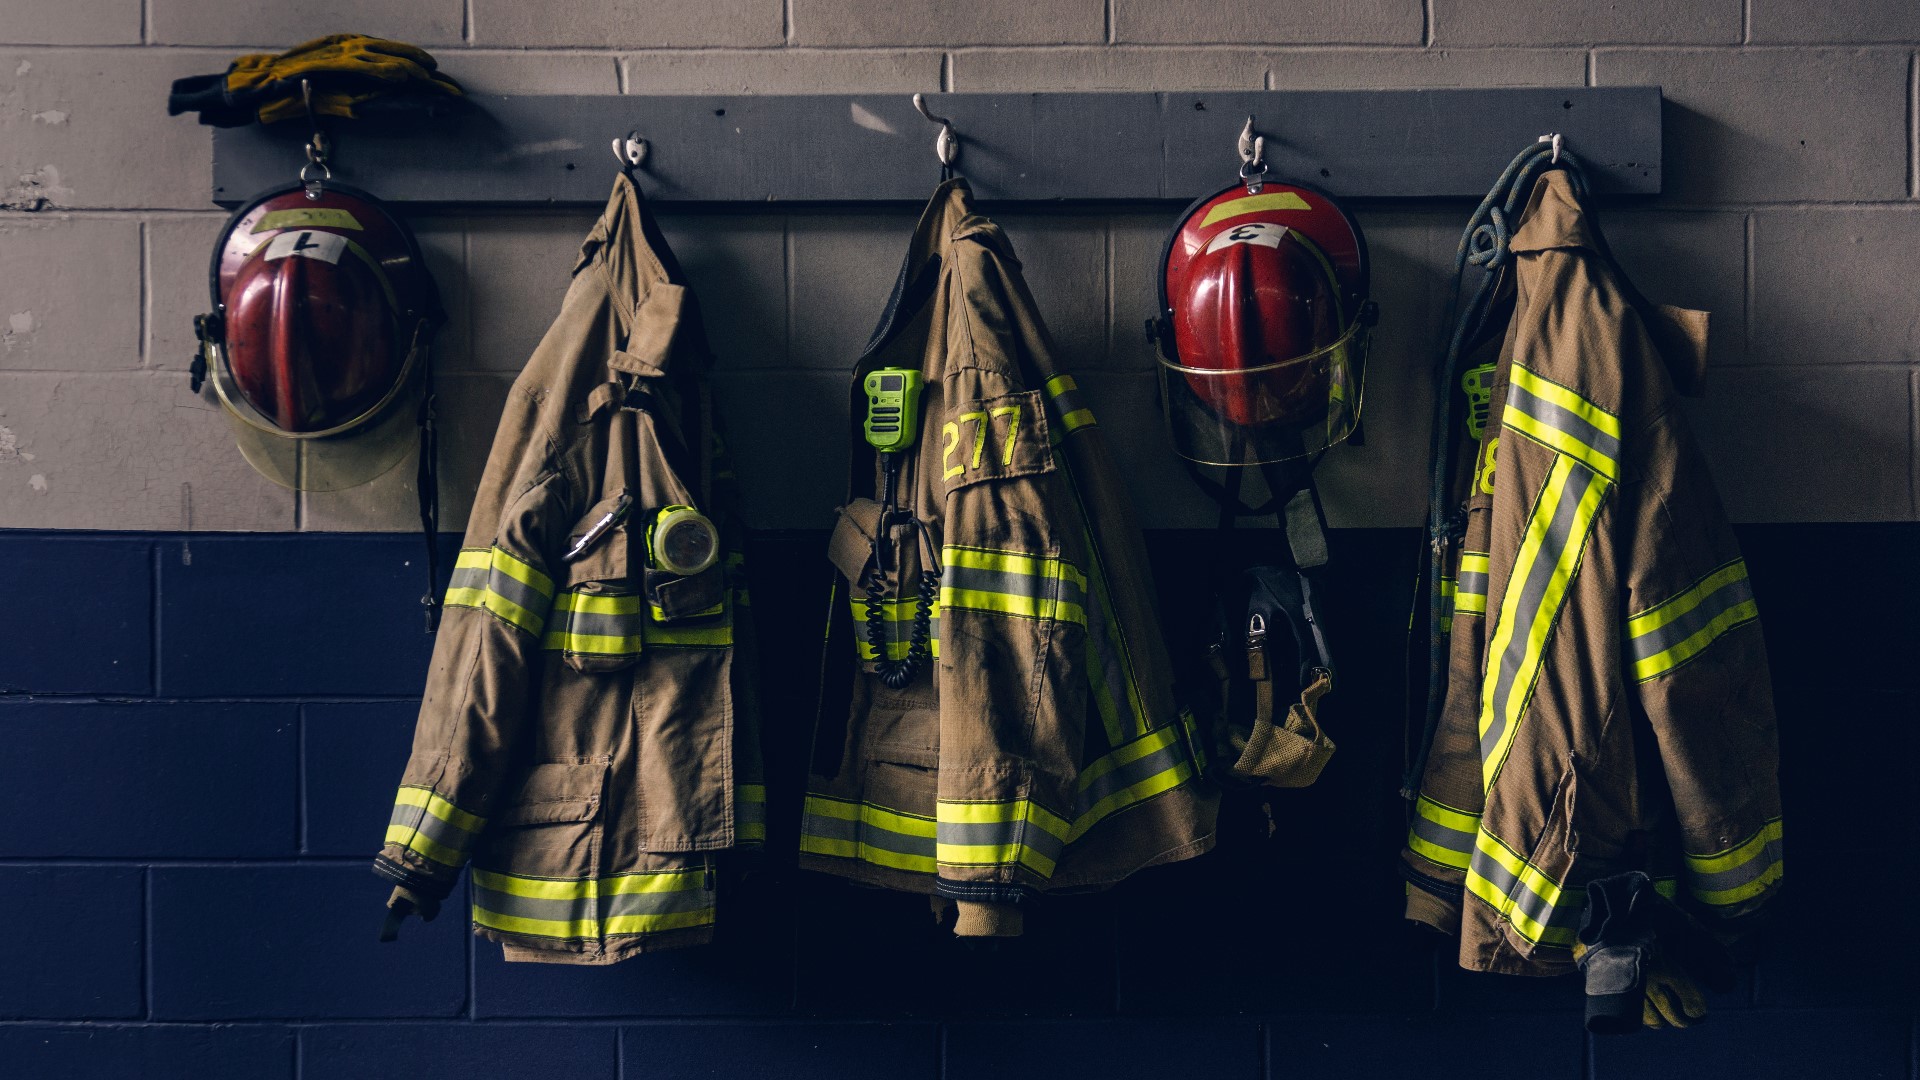 A new grant will help fund around 200 new firefighters in the Capitol Region.